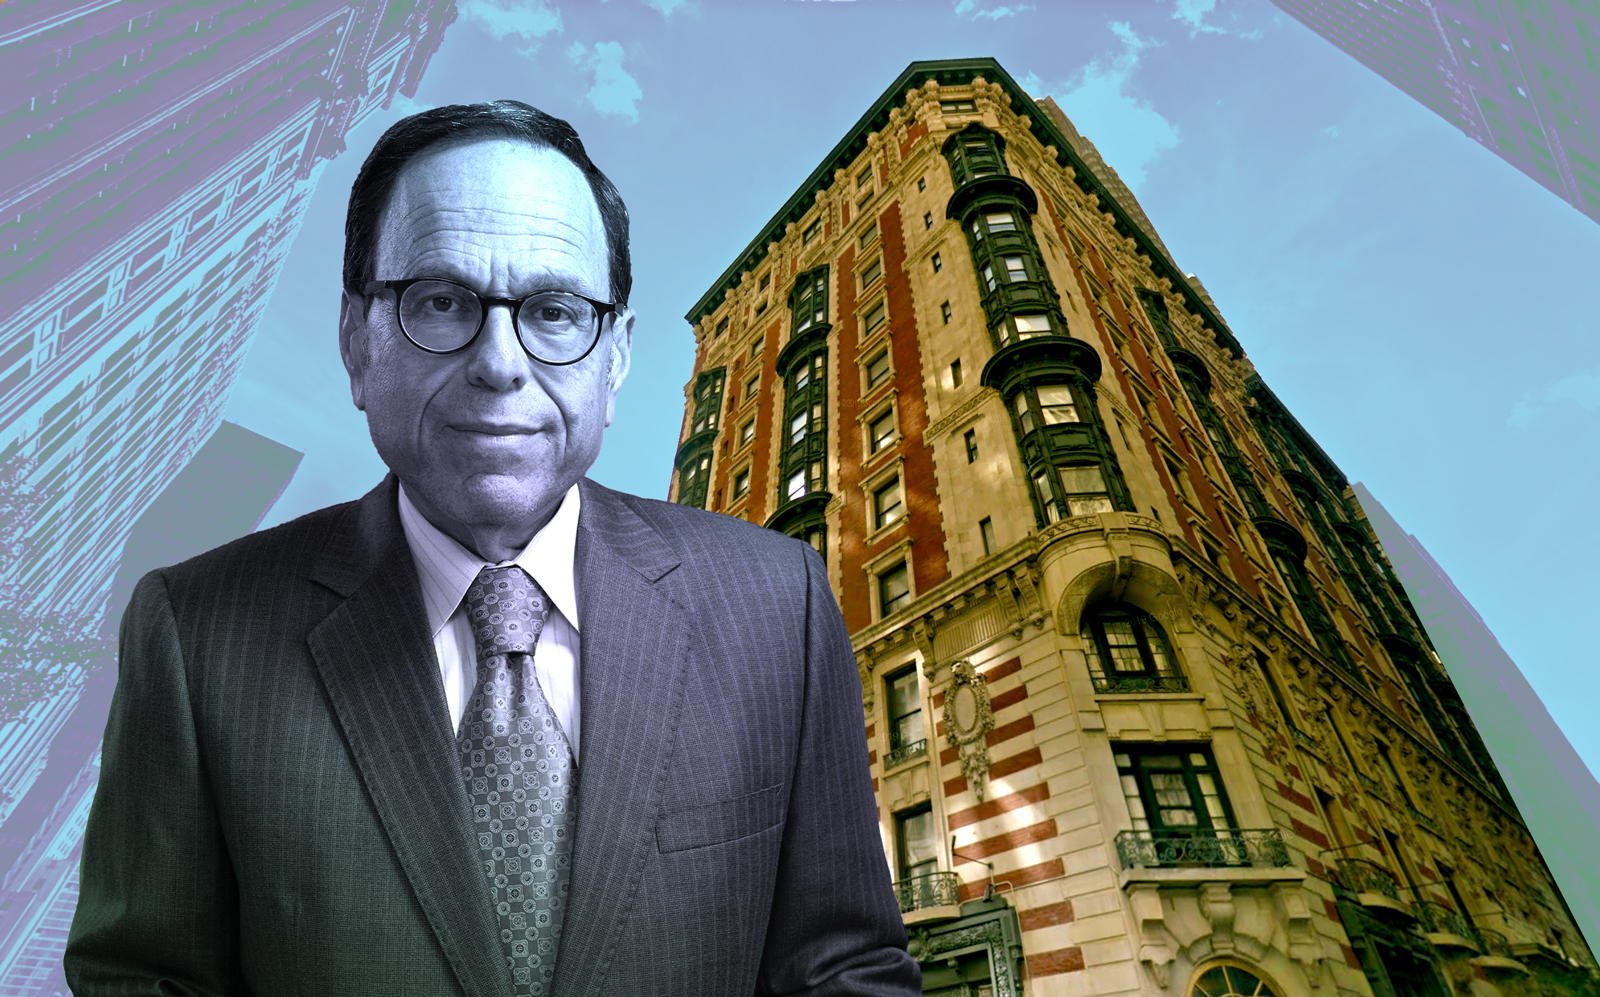 GFI Capital CEO Allen Gross and the James Hotel at 22 East 29th Street (Google Maps)